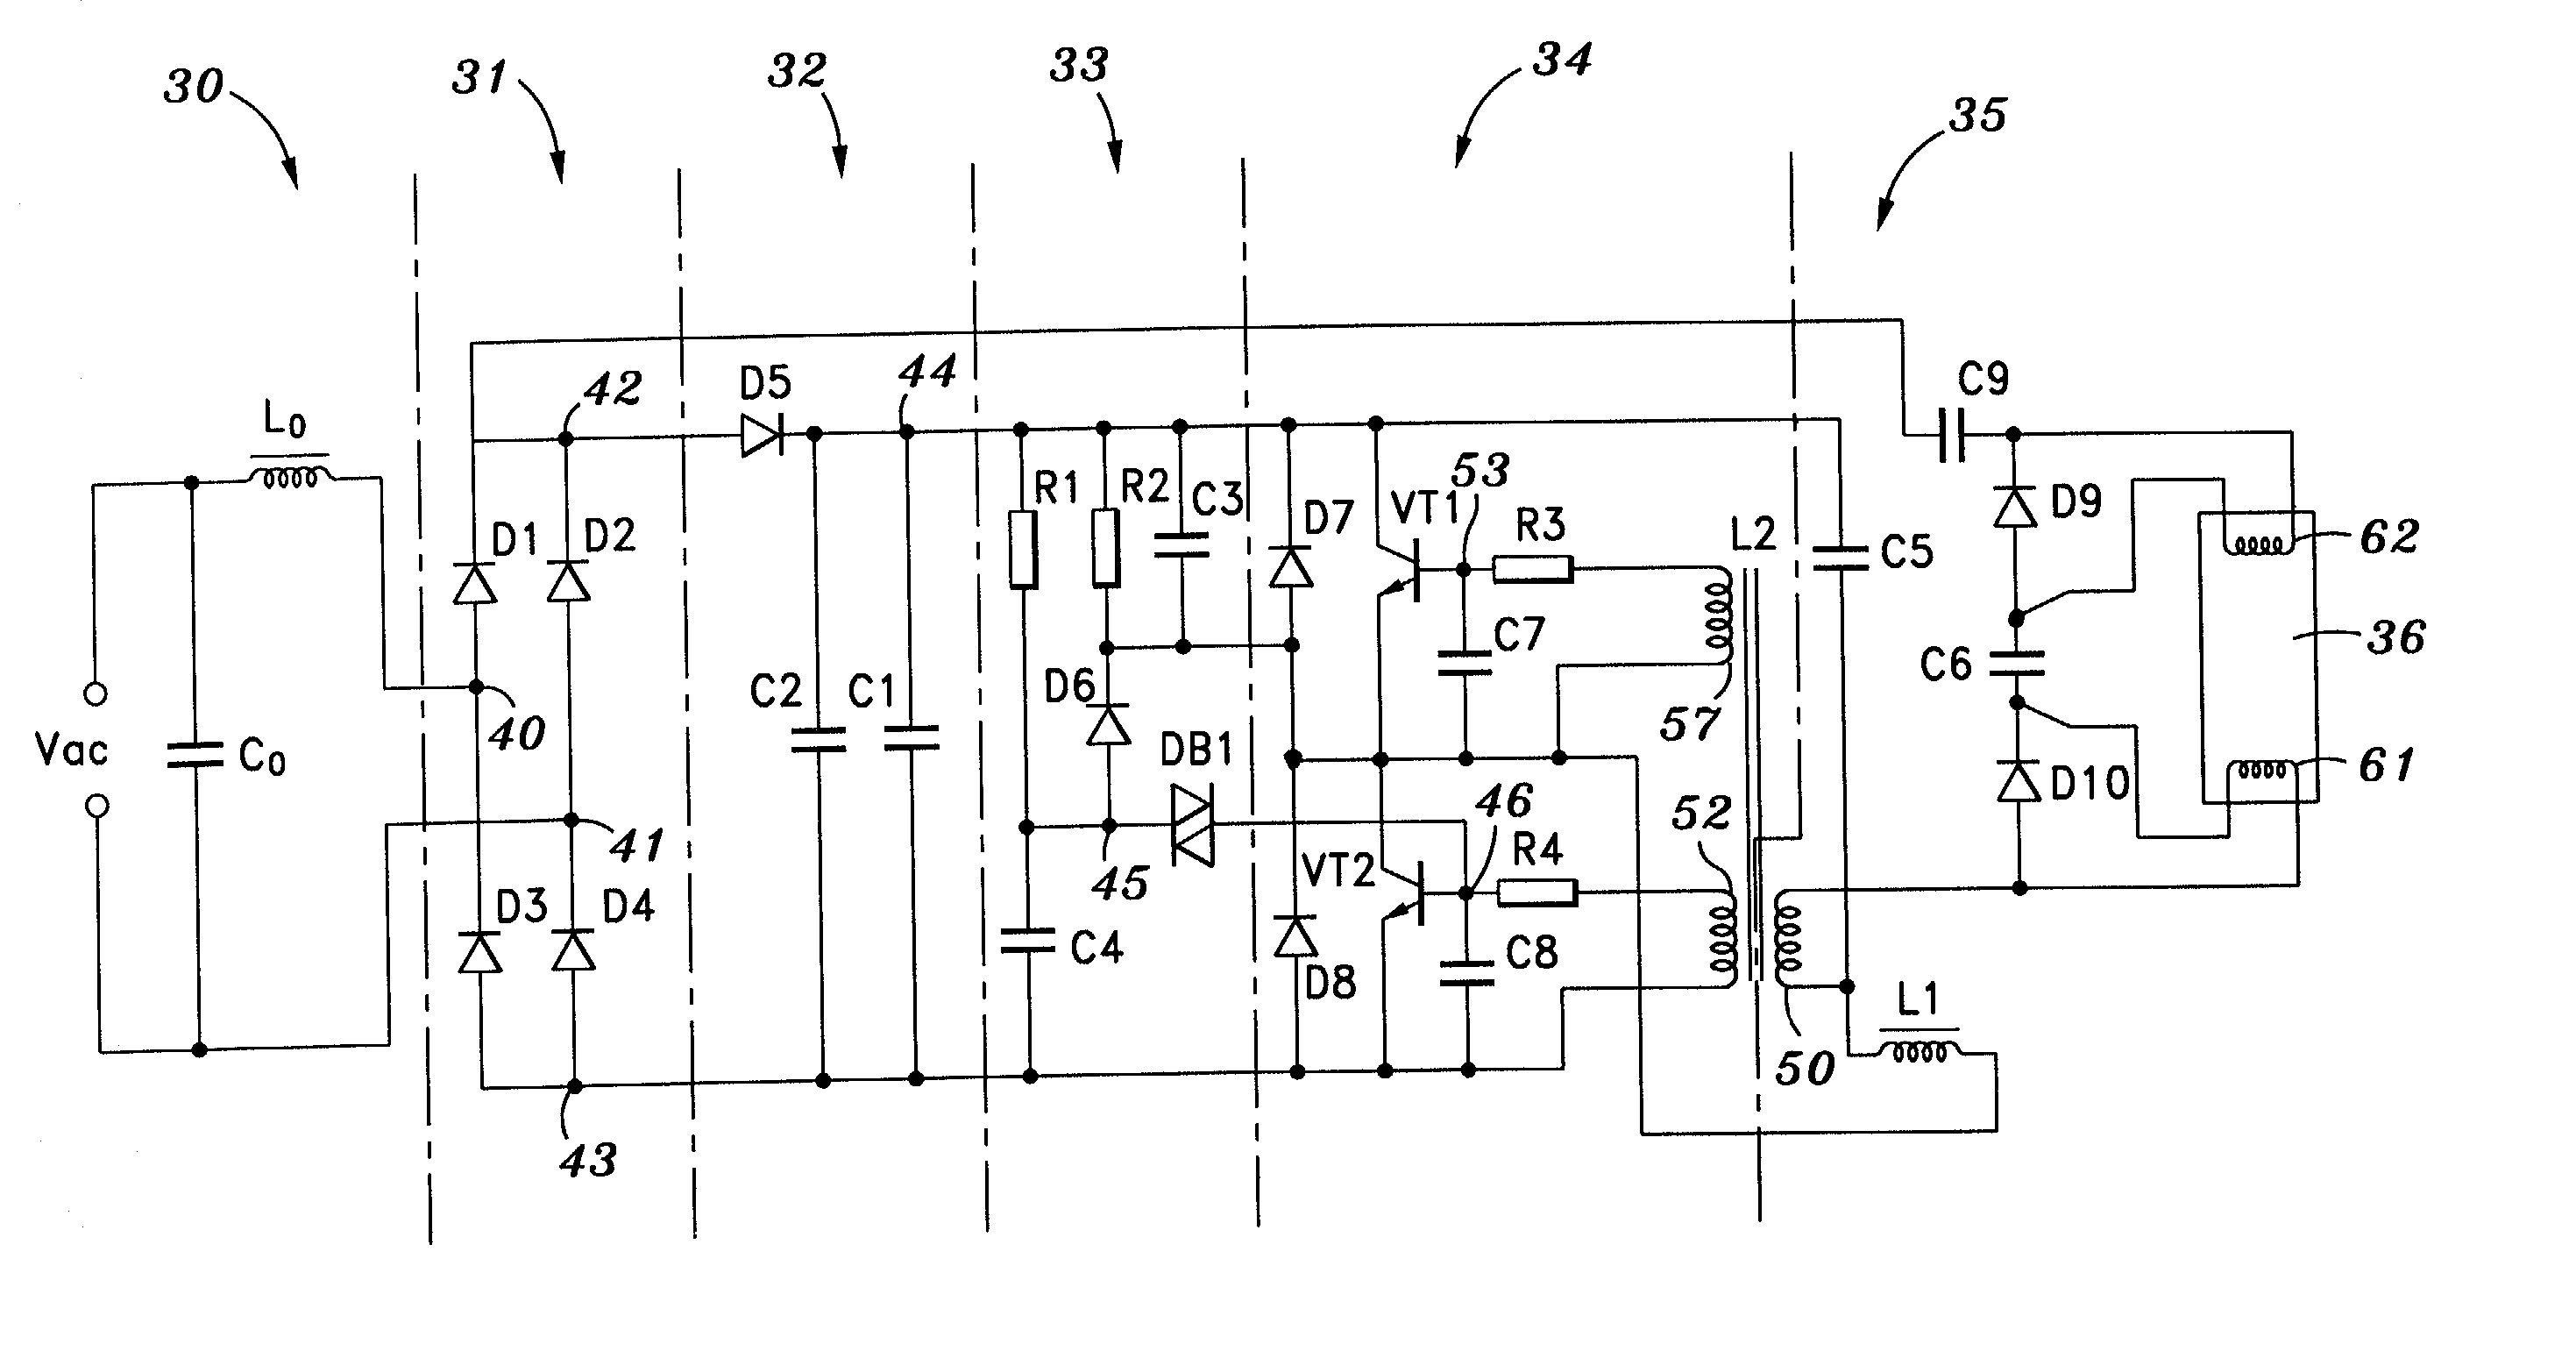 Control circuit for dimming fluorescent lamps